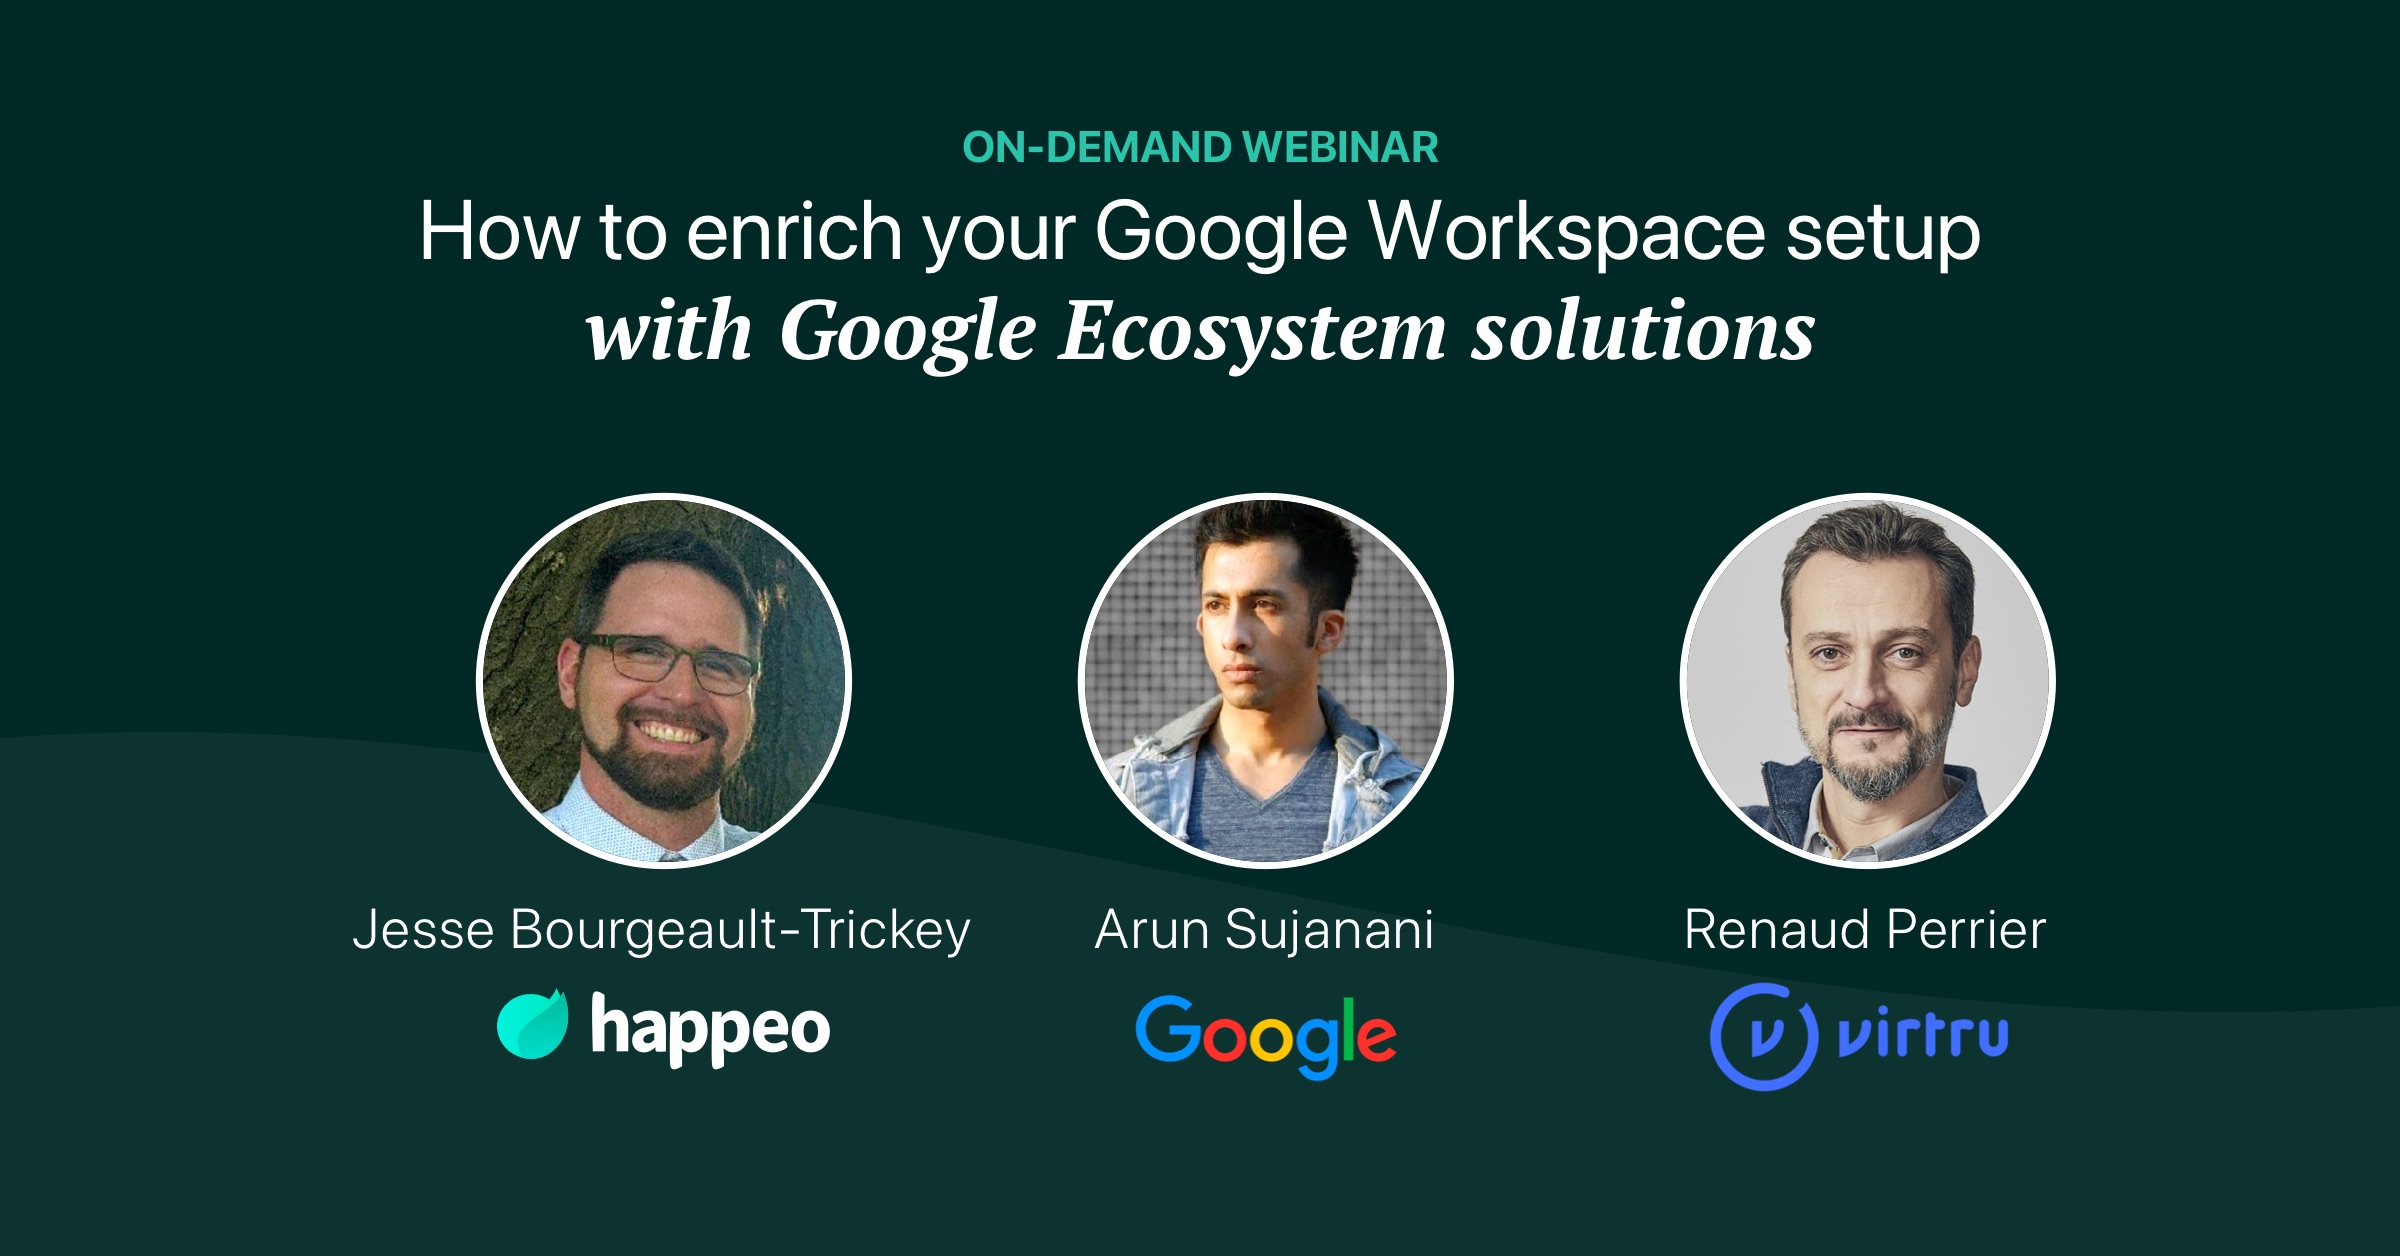 How to enrich your Google Workspace setup with Google Ecosystem solutions